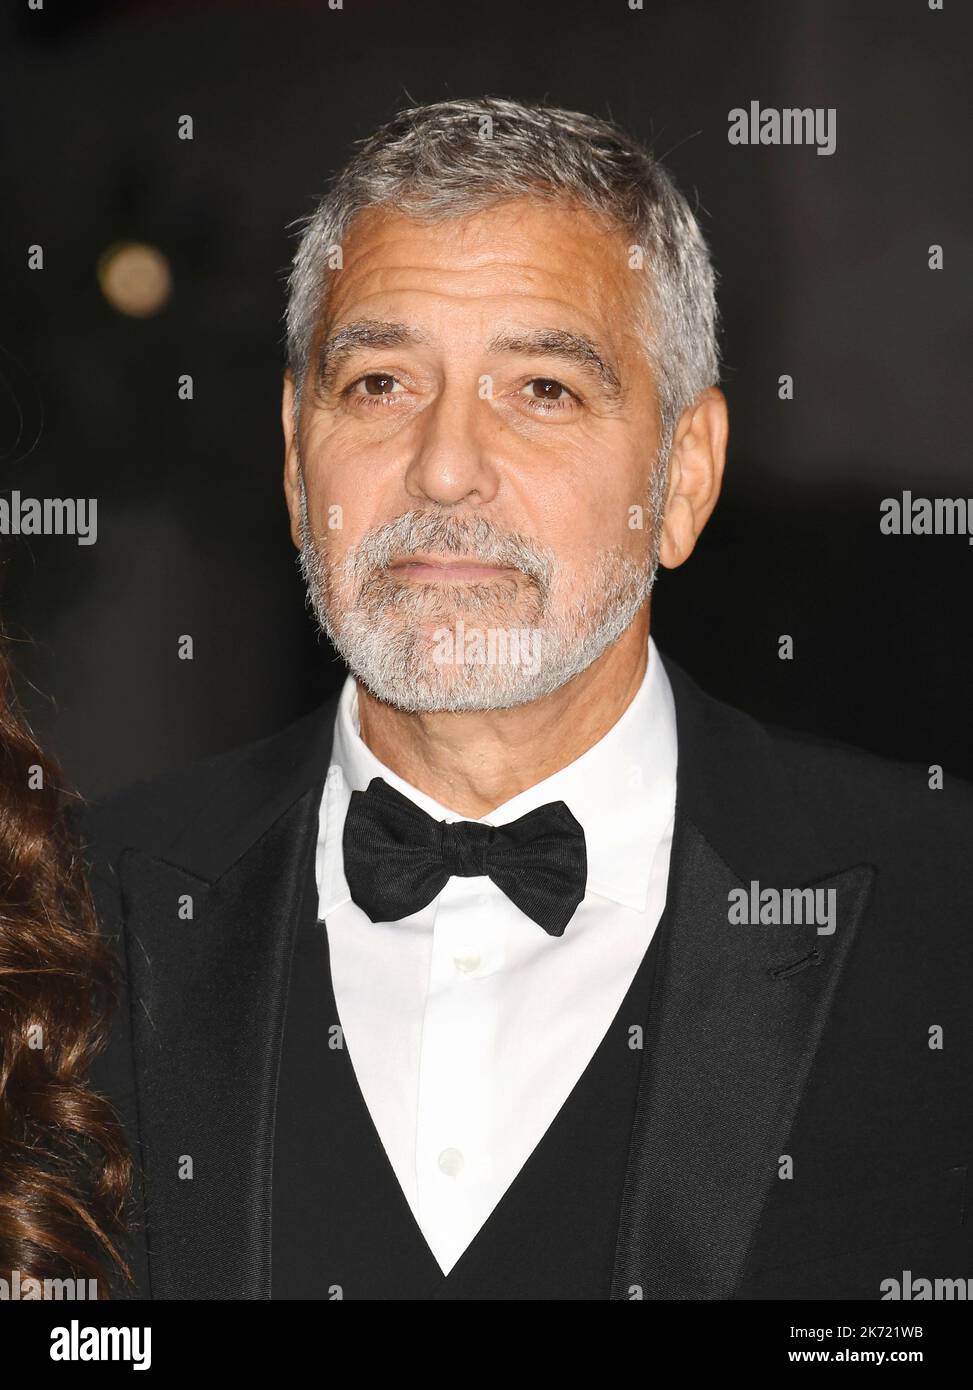 Los Angeles, Ca. 15th Oct, 2022. George Clooney attends the 2nd Annual Academy Museum Gala at Academy Museum of Motion Pictures on October 15, 2022 in Los Angeles, California. Credit: Jeffrey Mayer/Jtm Photos/Media Punch/Alamy Live News Stock Photo